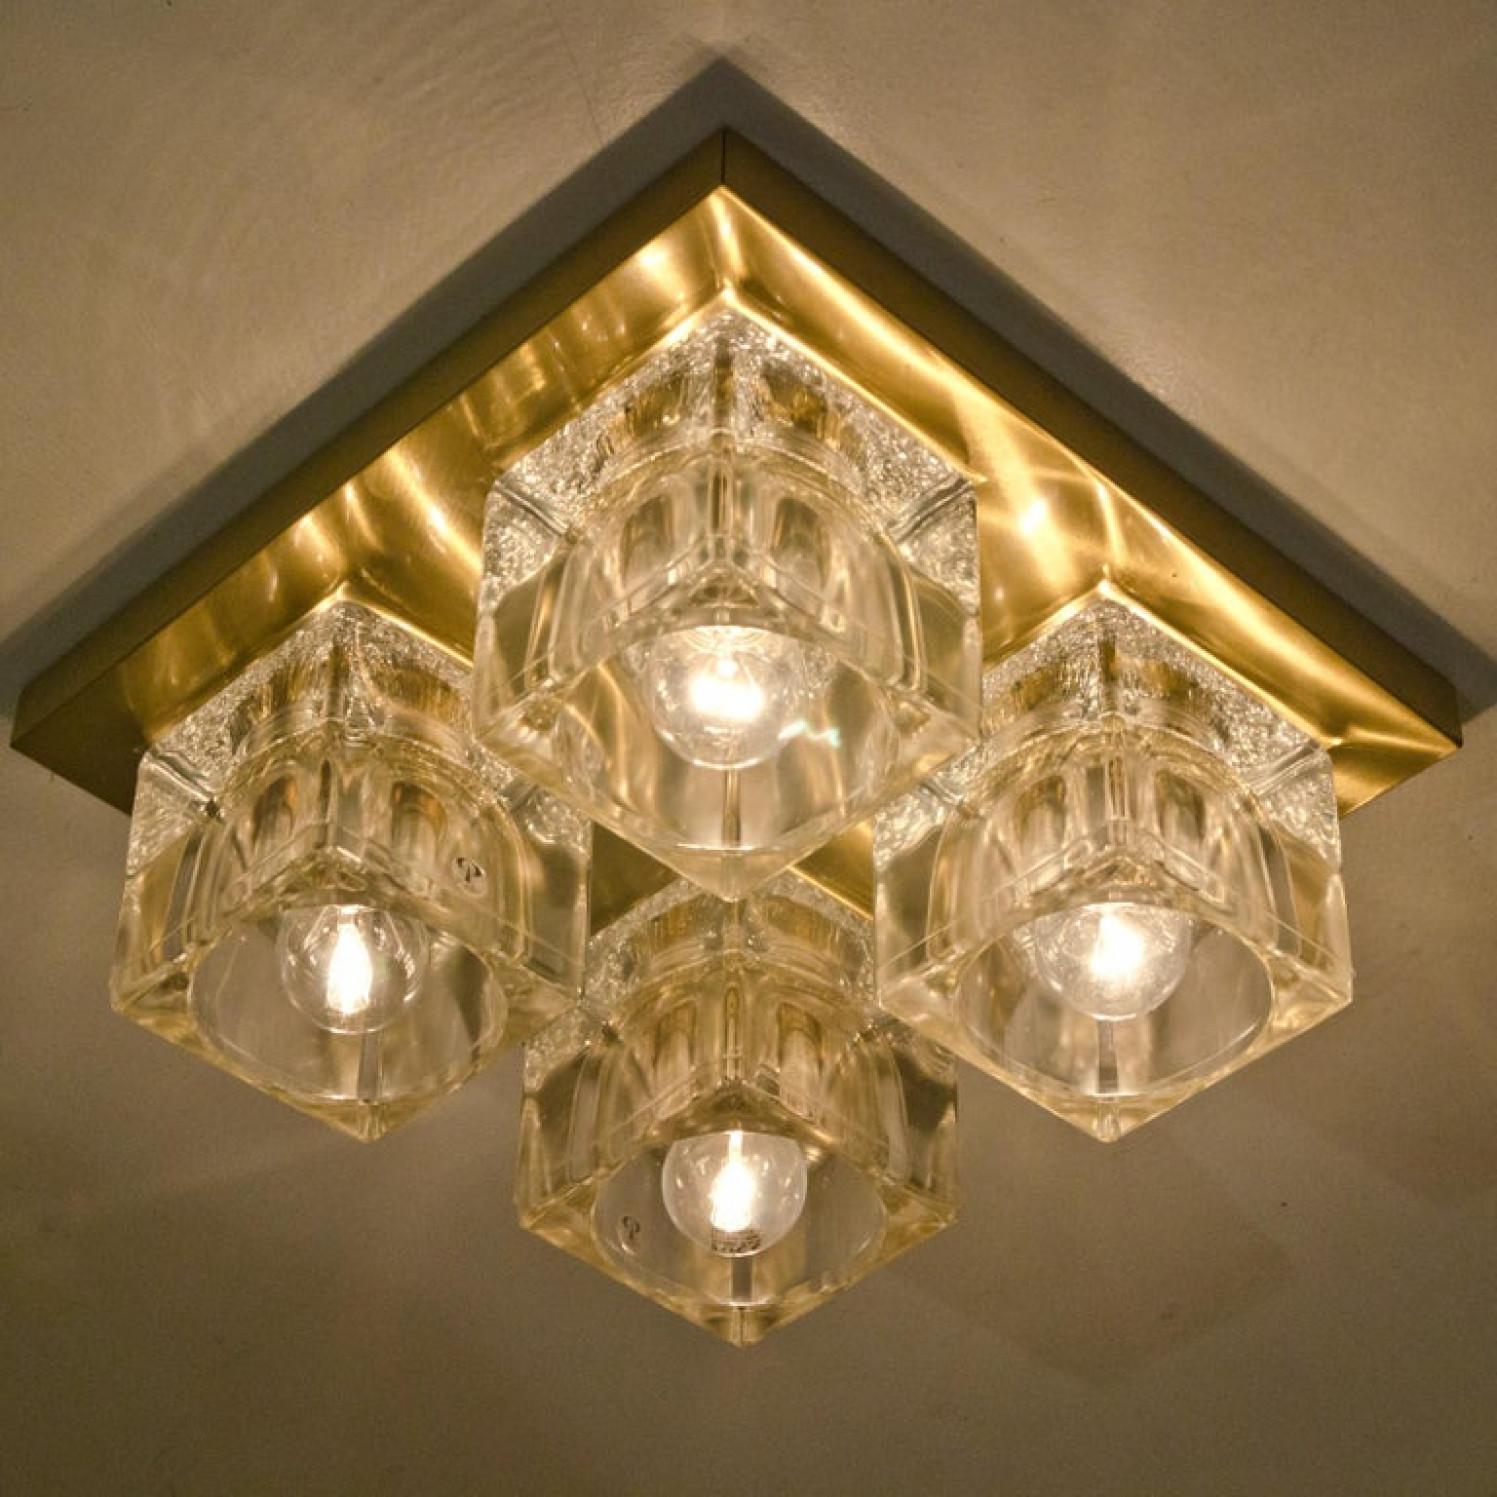 1 of 4 Peill & Putzler Wall Light Ceiling Light, Brass and Glass, Germany, 1970 For Sale 7